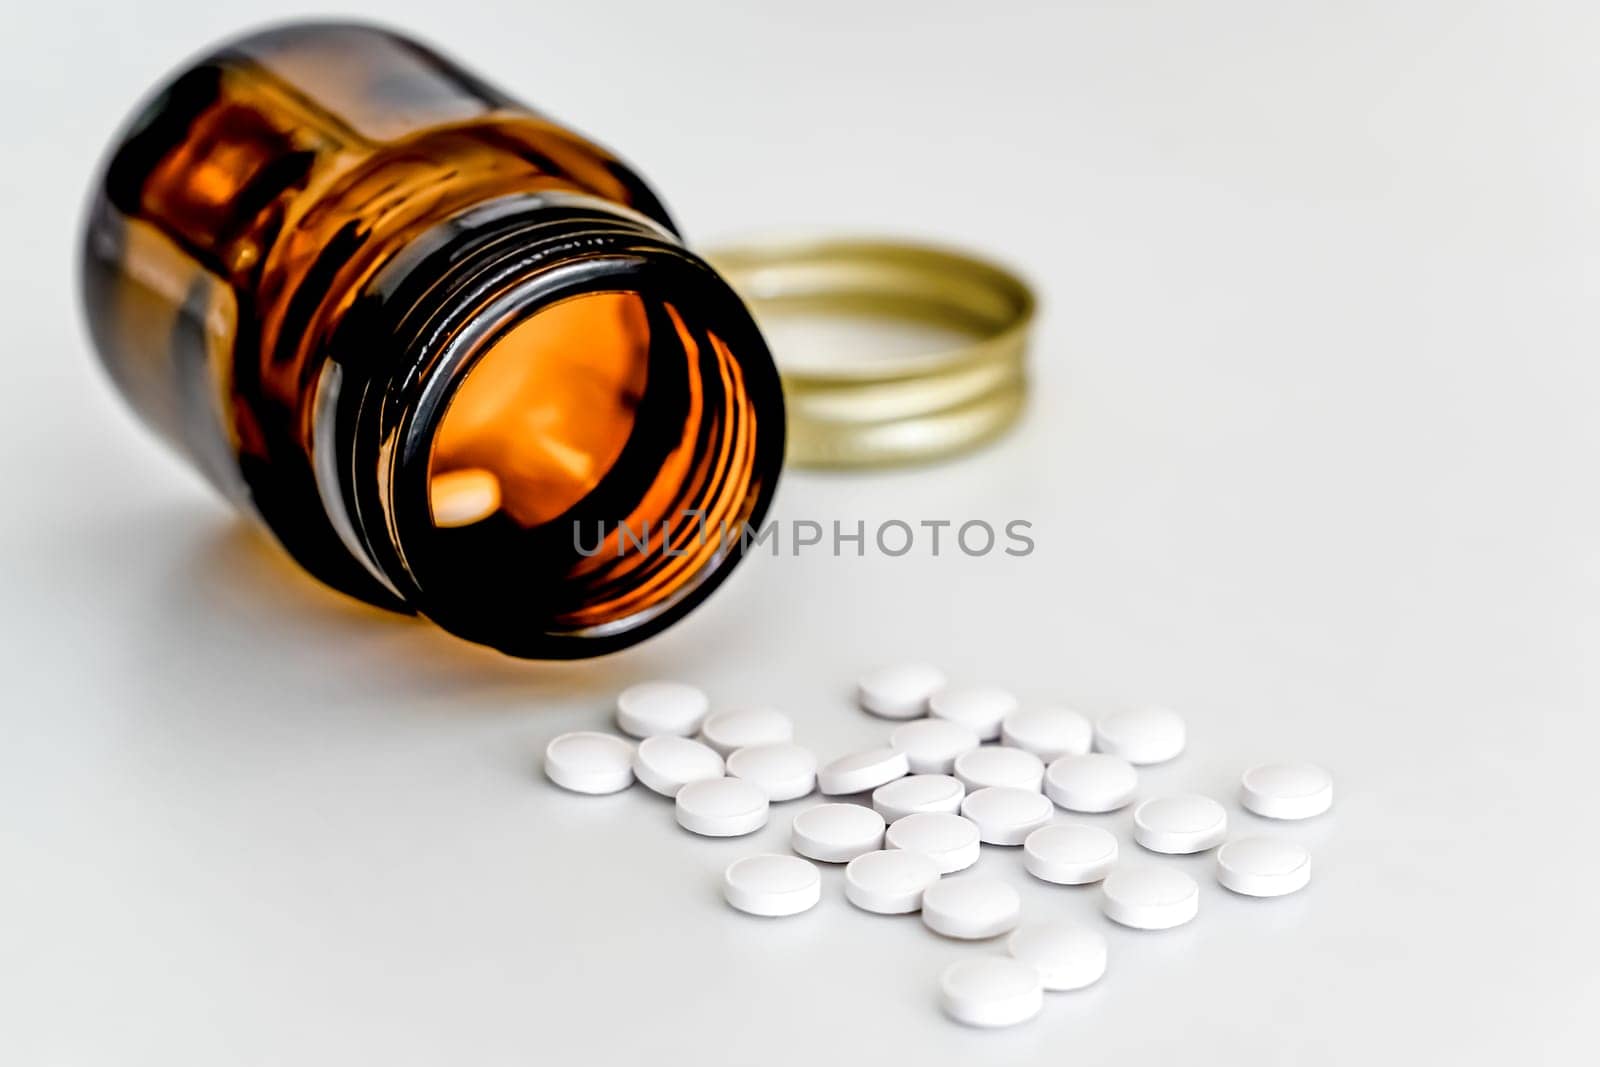 White Pills Scattered on Table Next to Brown Glass Vial, on White Background, Close-up. by Laguna781